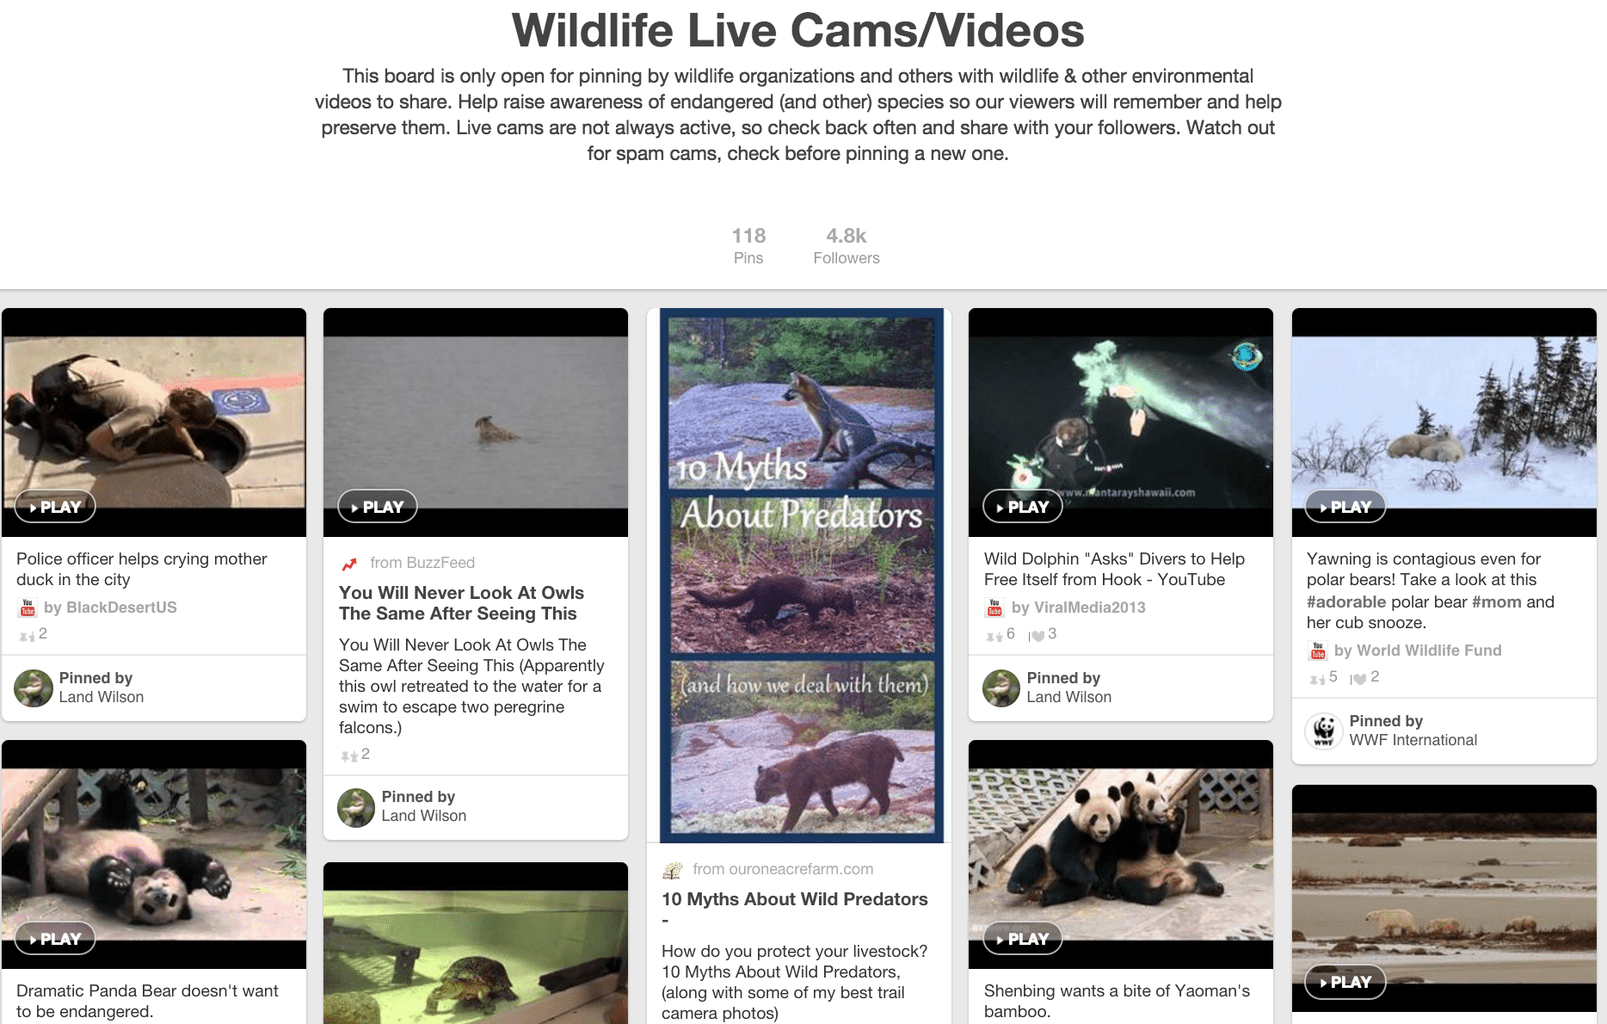 How Does Pinterest Work for Nonprofits? National Wildlife Association board aggregating live wildlife cams from around the world.